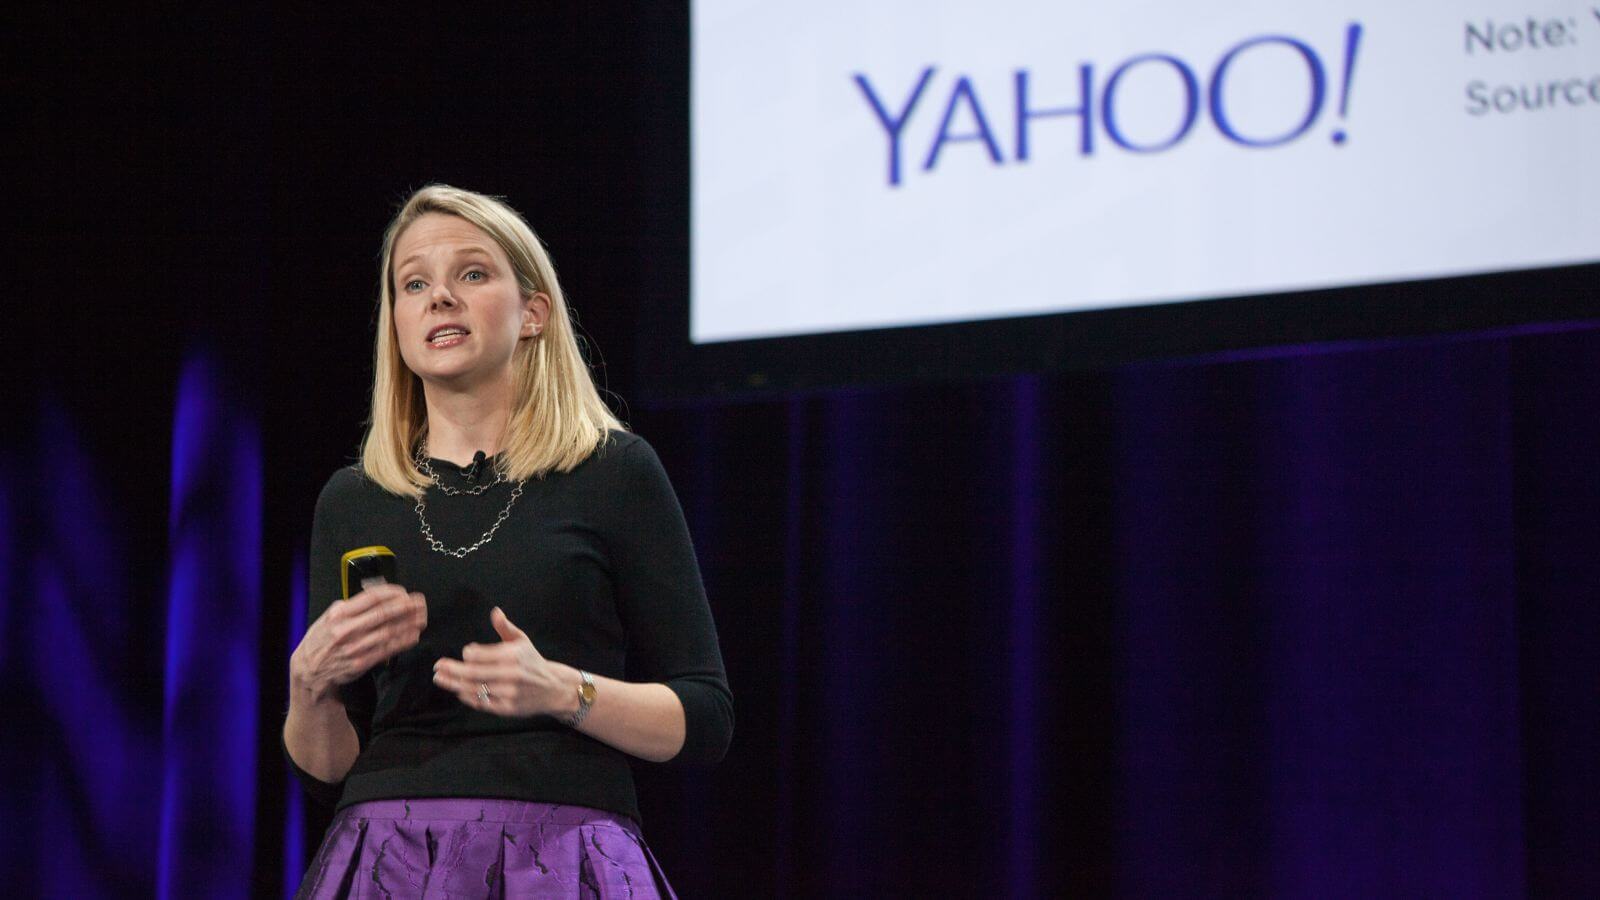 AOL / Yahoo units to come together as Oath under Verizon